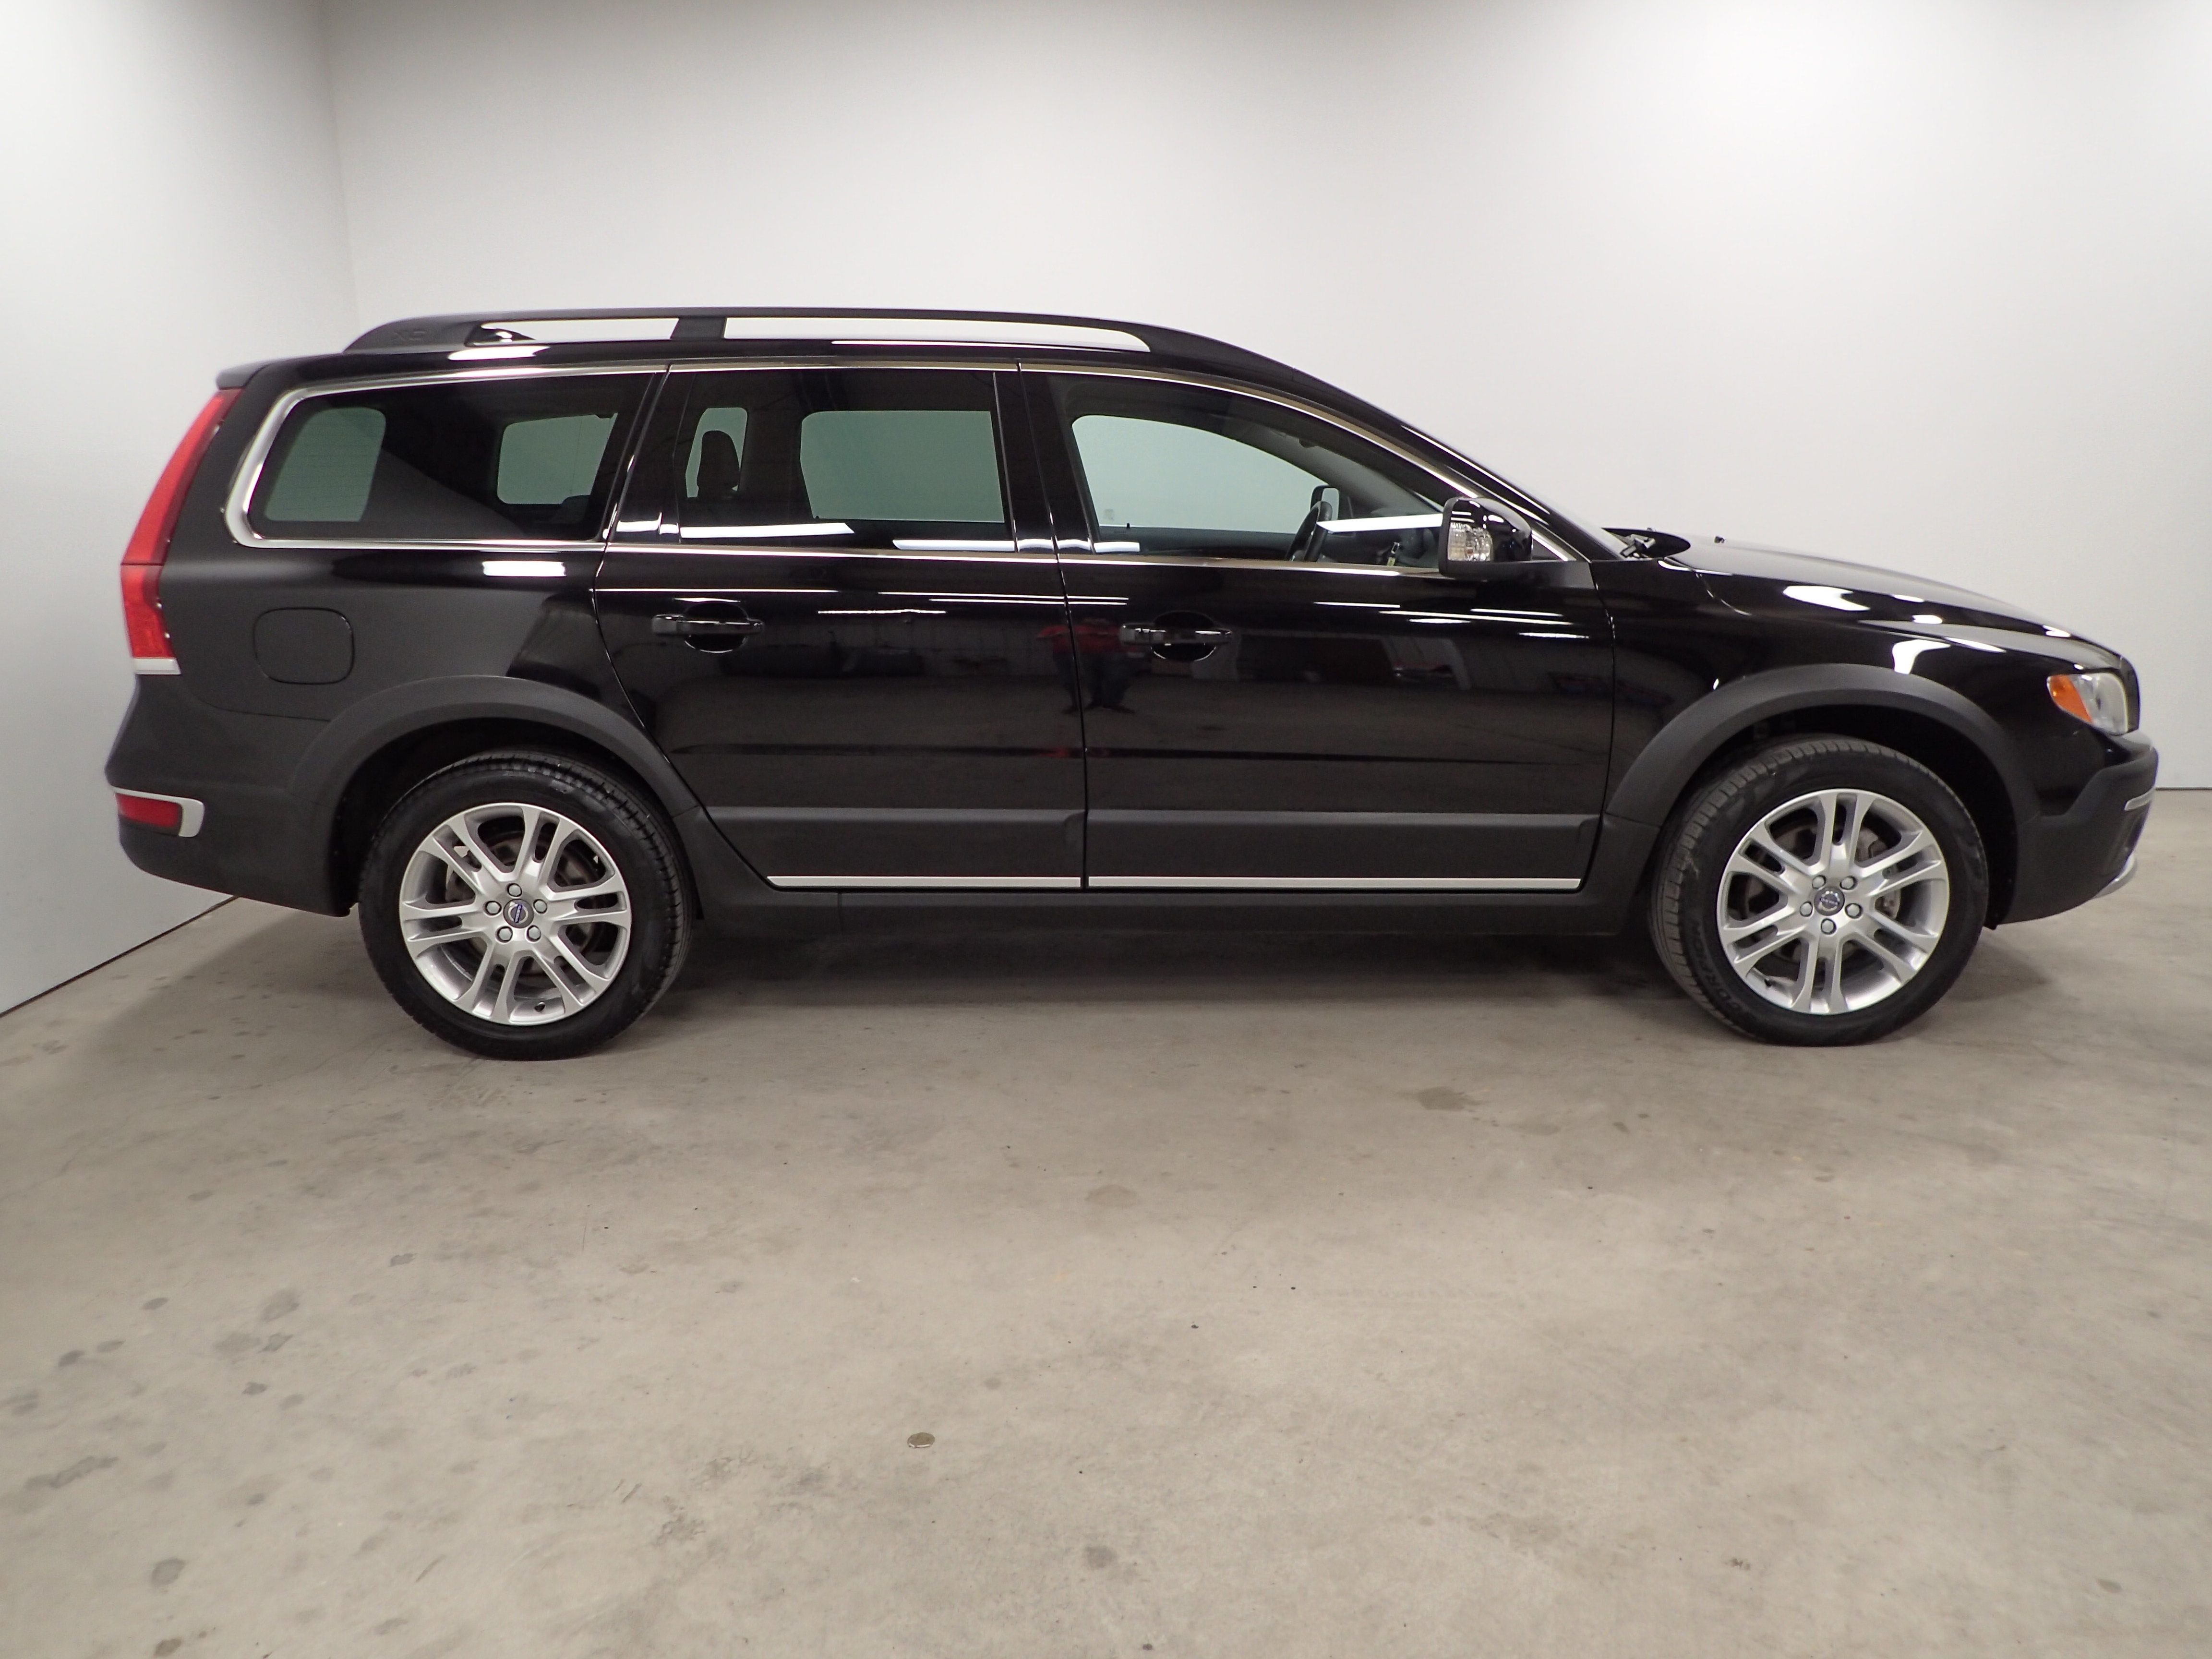 Pre-Owned 2016 Volvo XC70 T5 Premier Station Wagon in Manheim #243482 ...